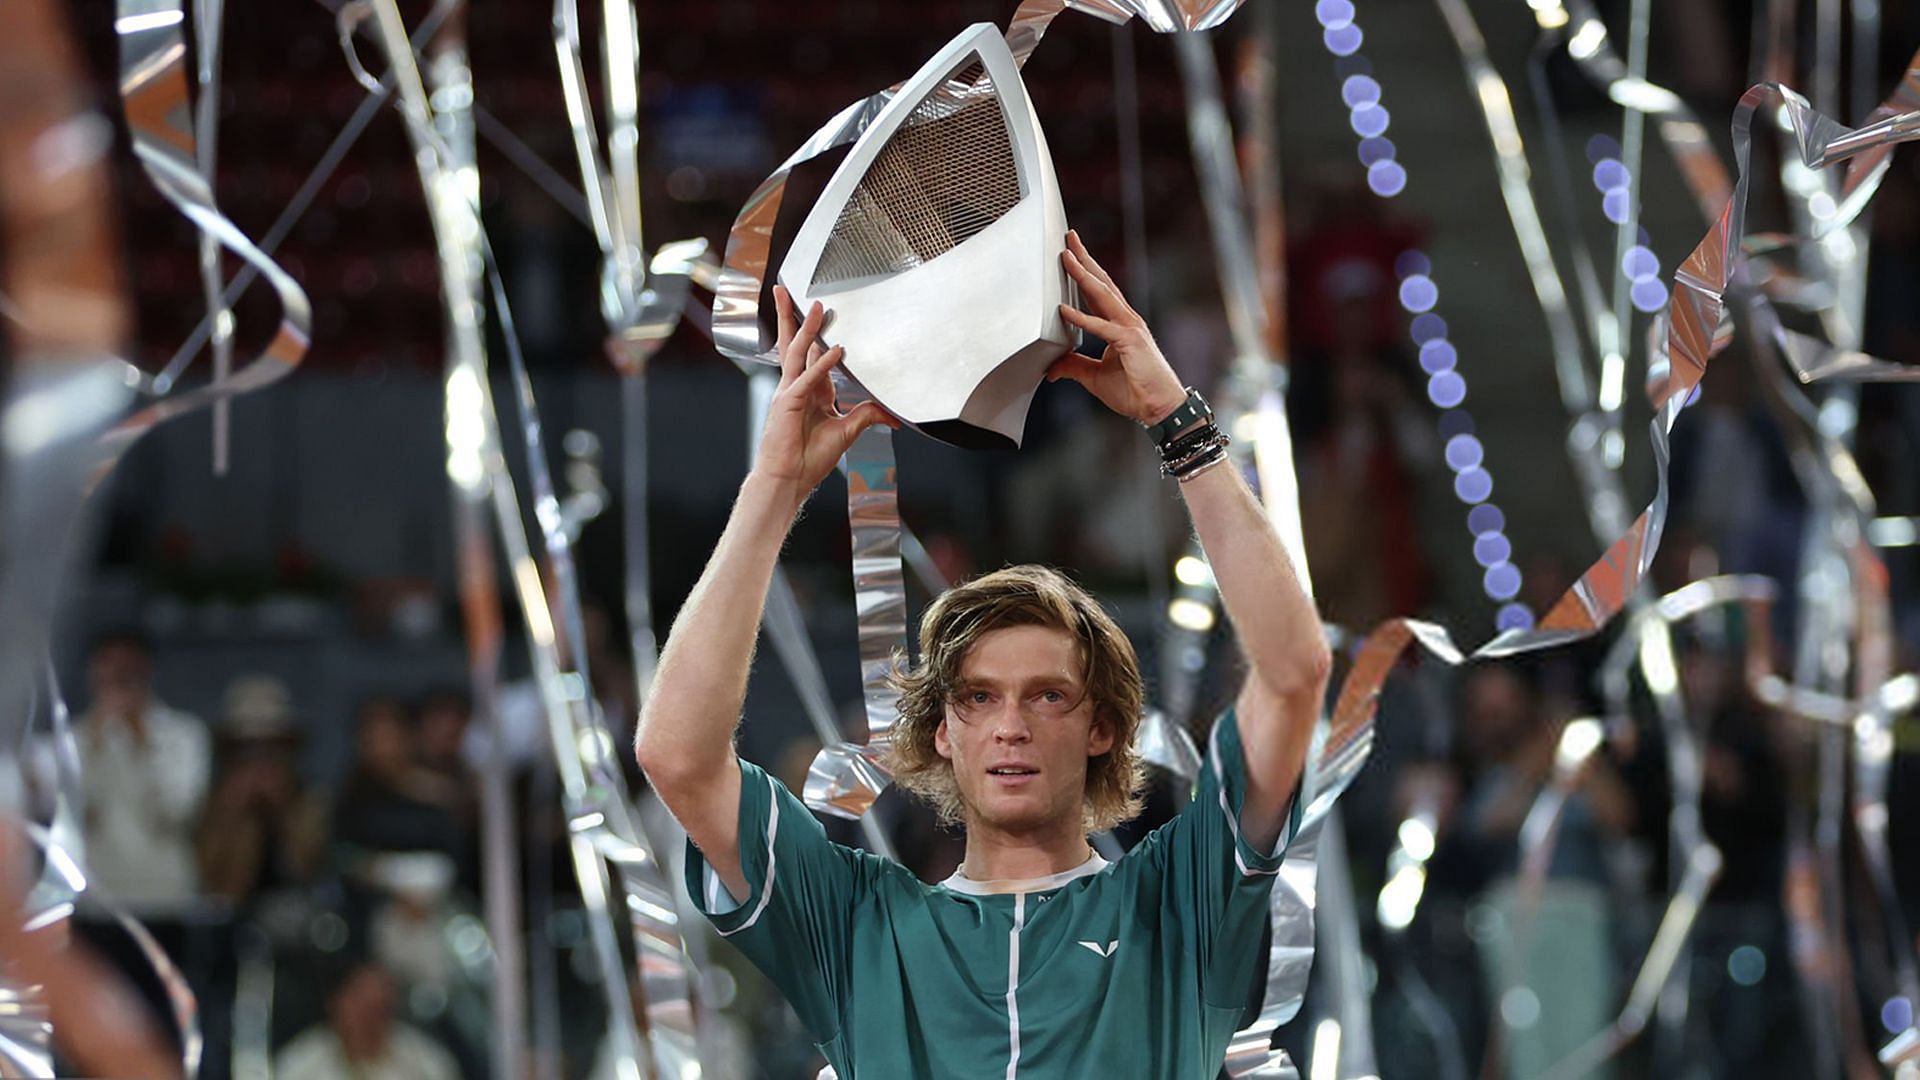 Rublev won his second Masters 1000 title in Madrid